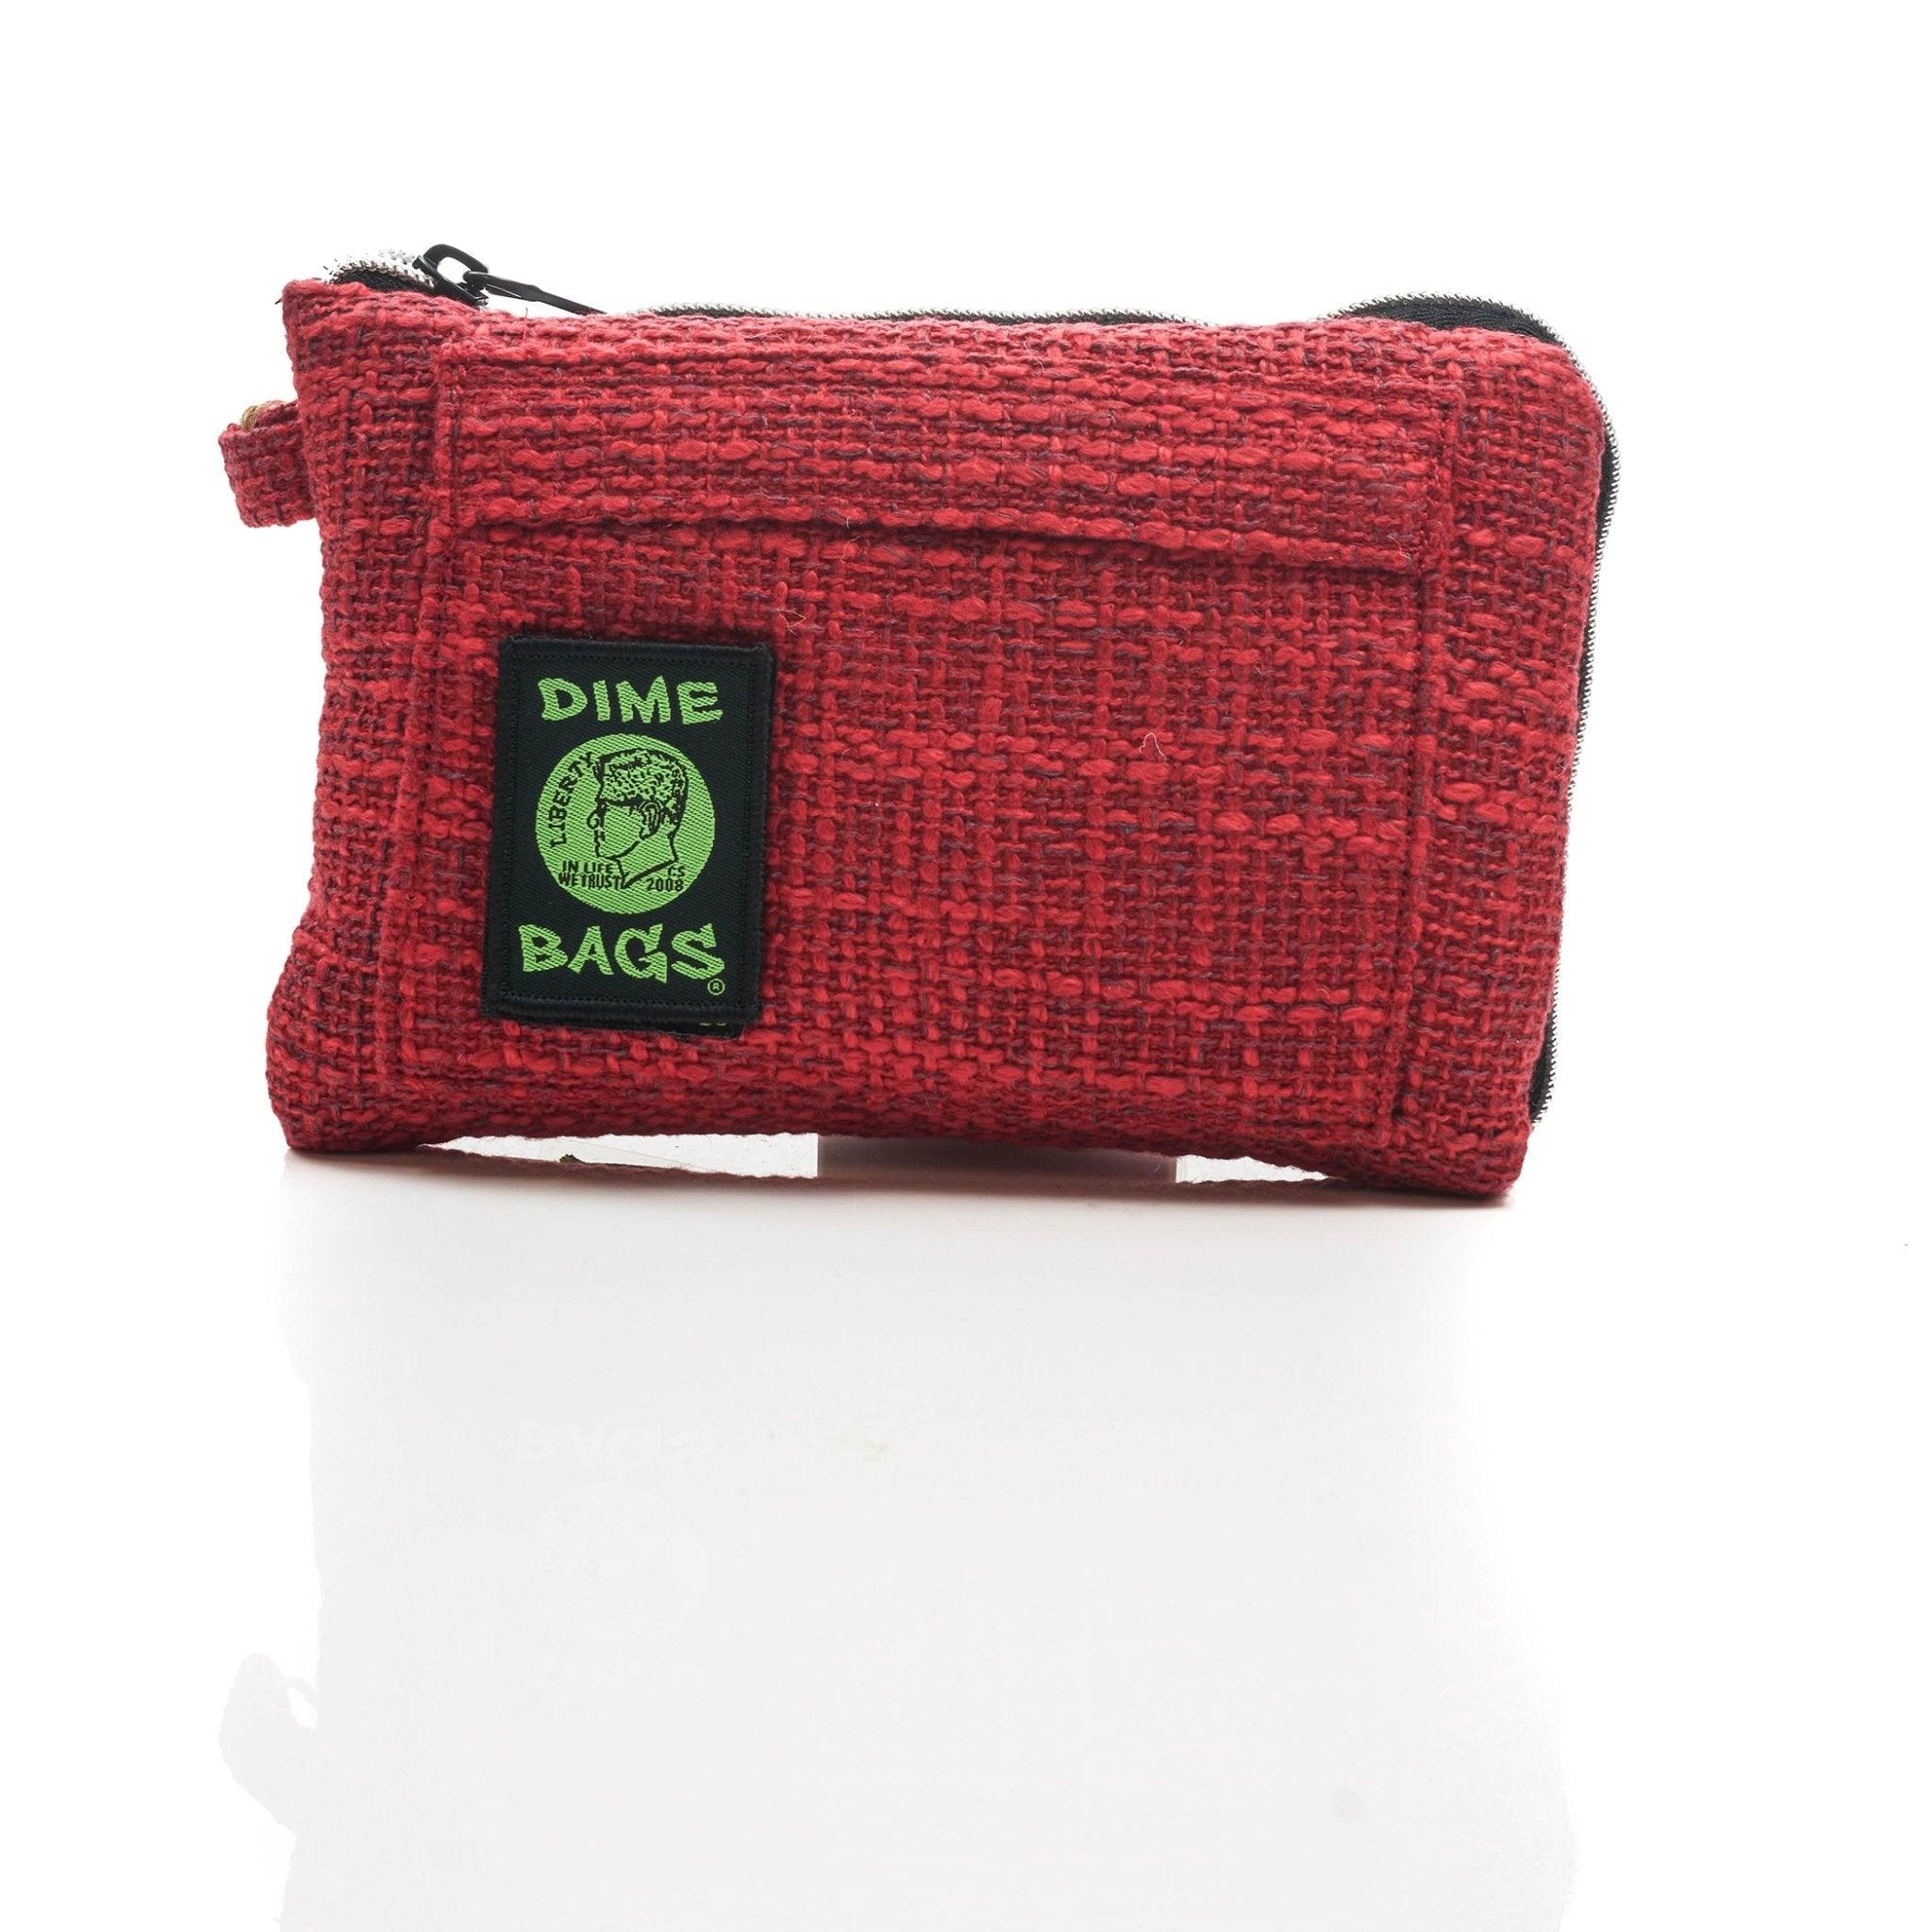 Dime Bag Accessories Dime Bag 8" padded pouch - red